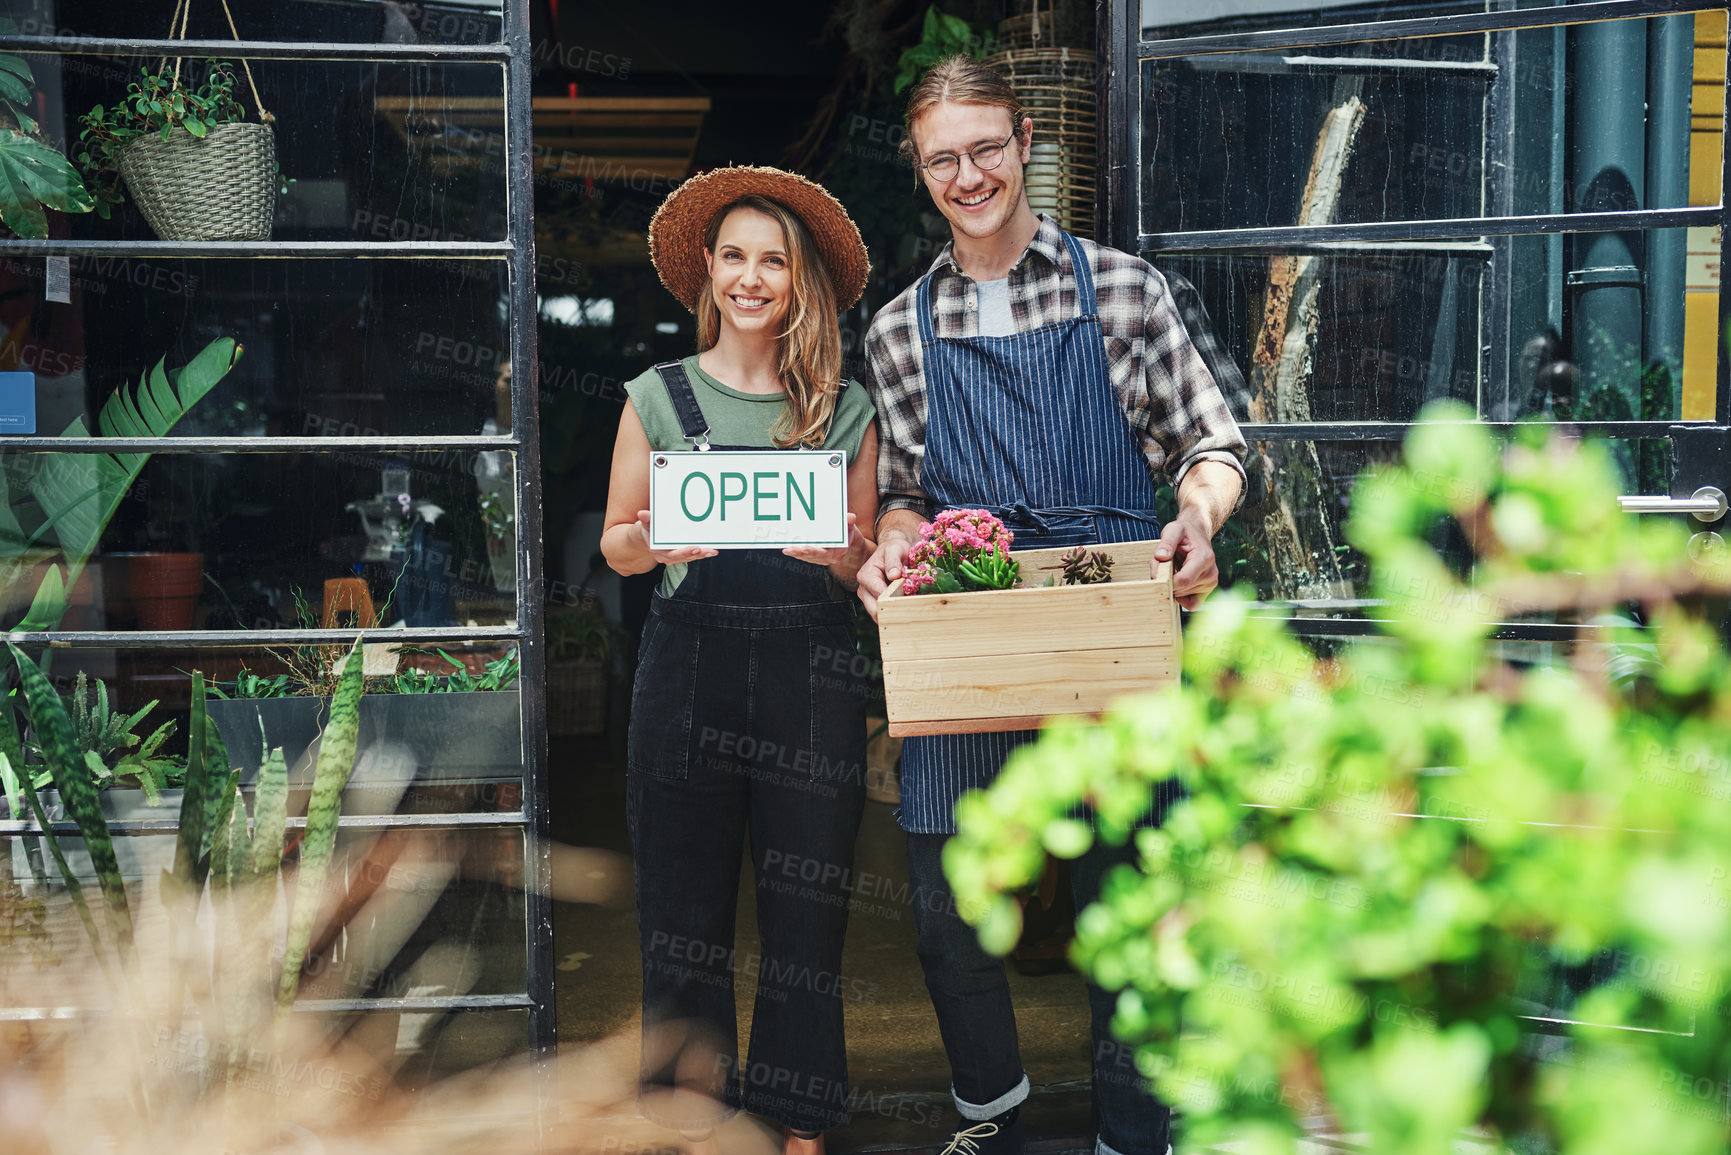 Buy stock photo Cropped portrait of two young business owners standing at the entrance of their floristry together and holding potting supplies